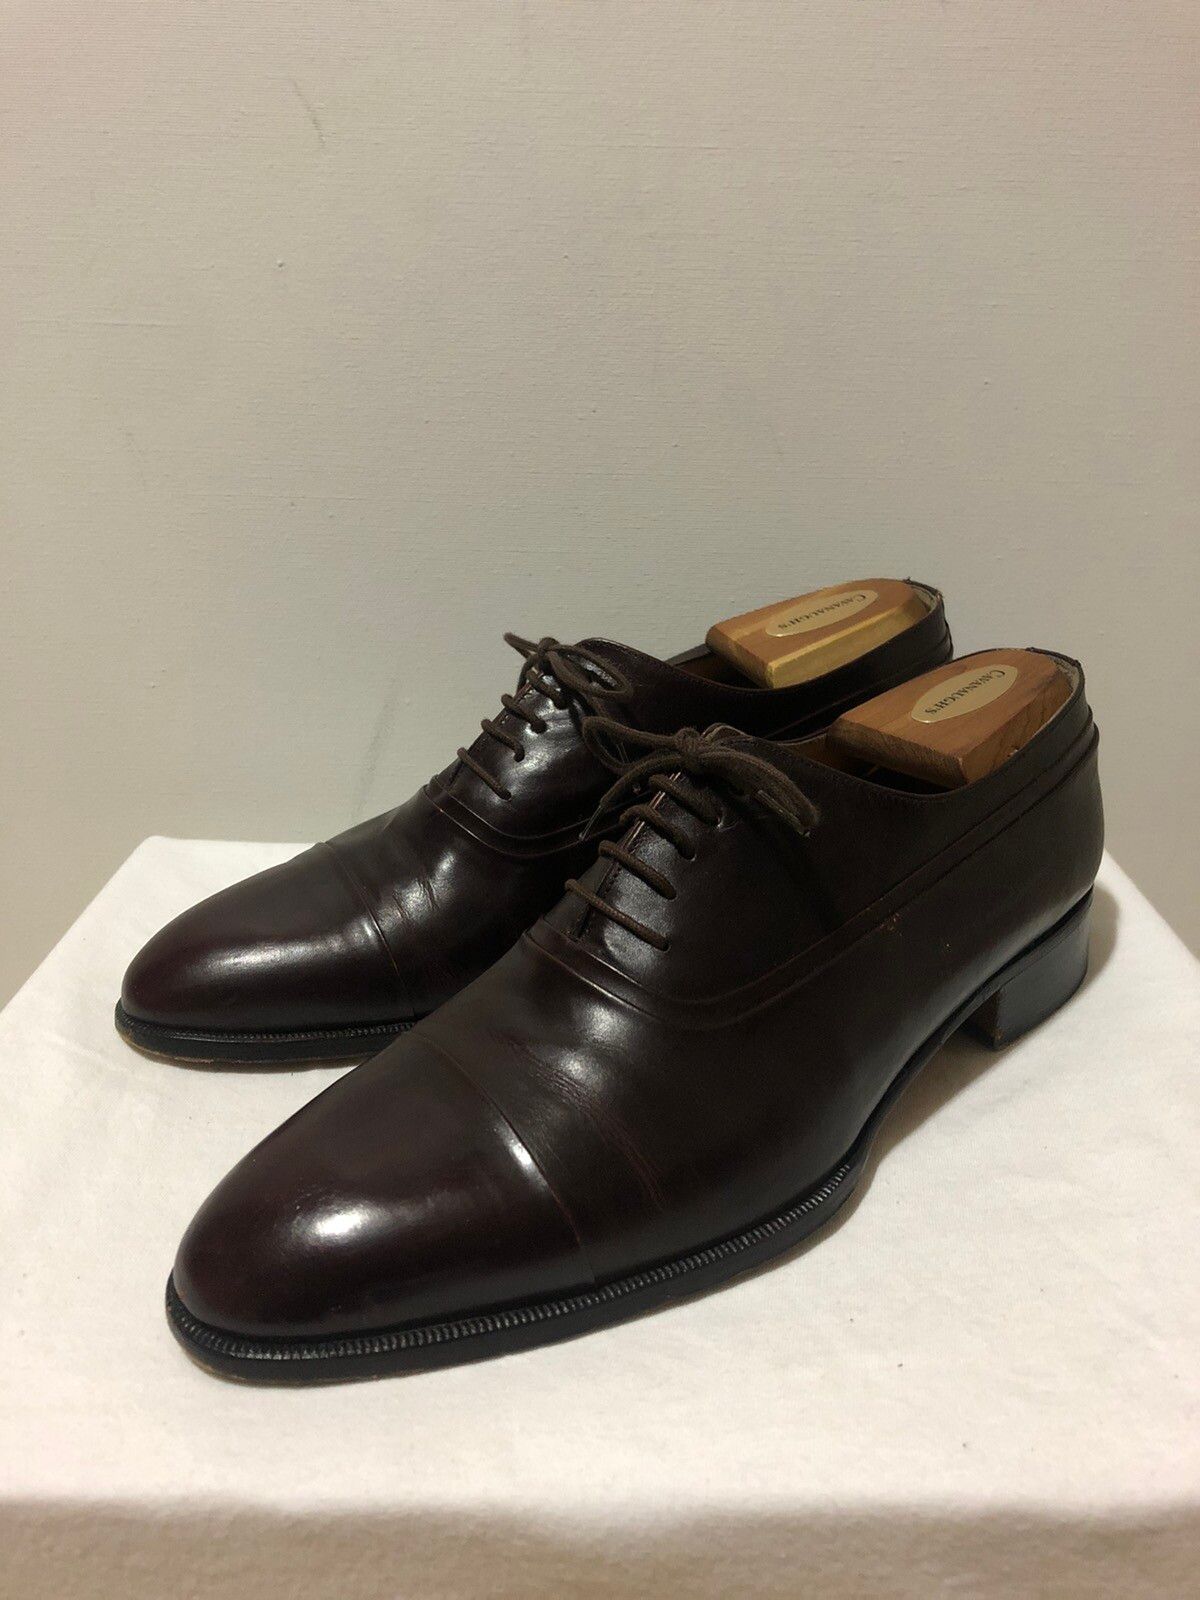 Bally Bally formal leather shoes | Grailed